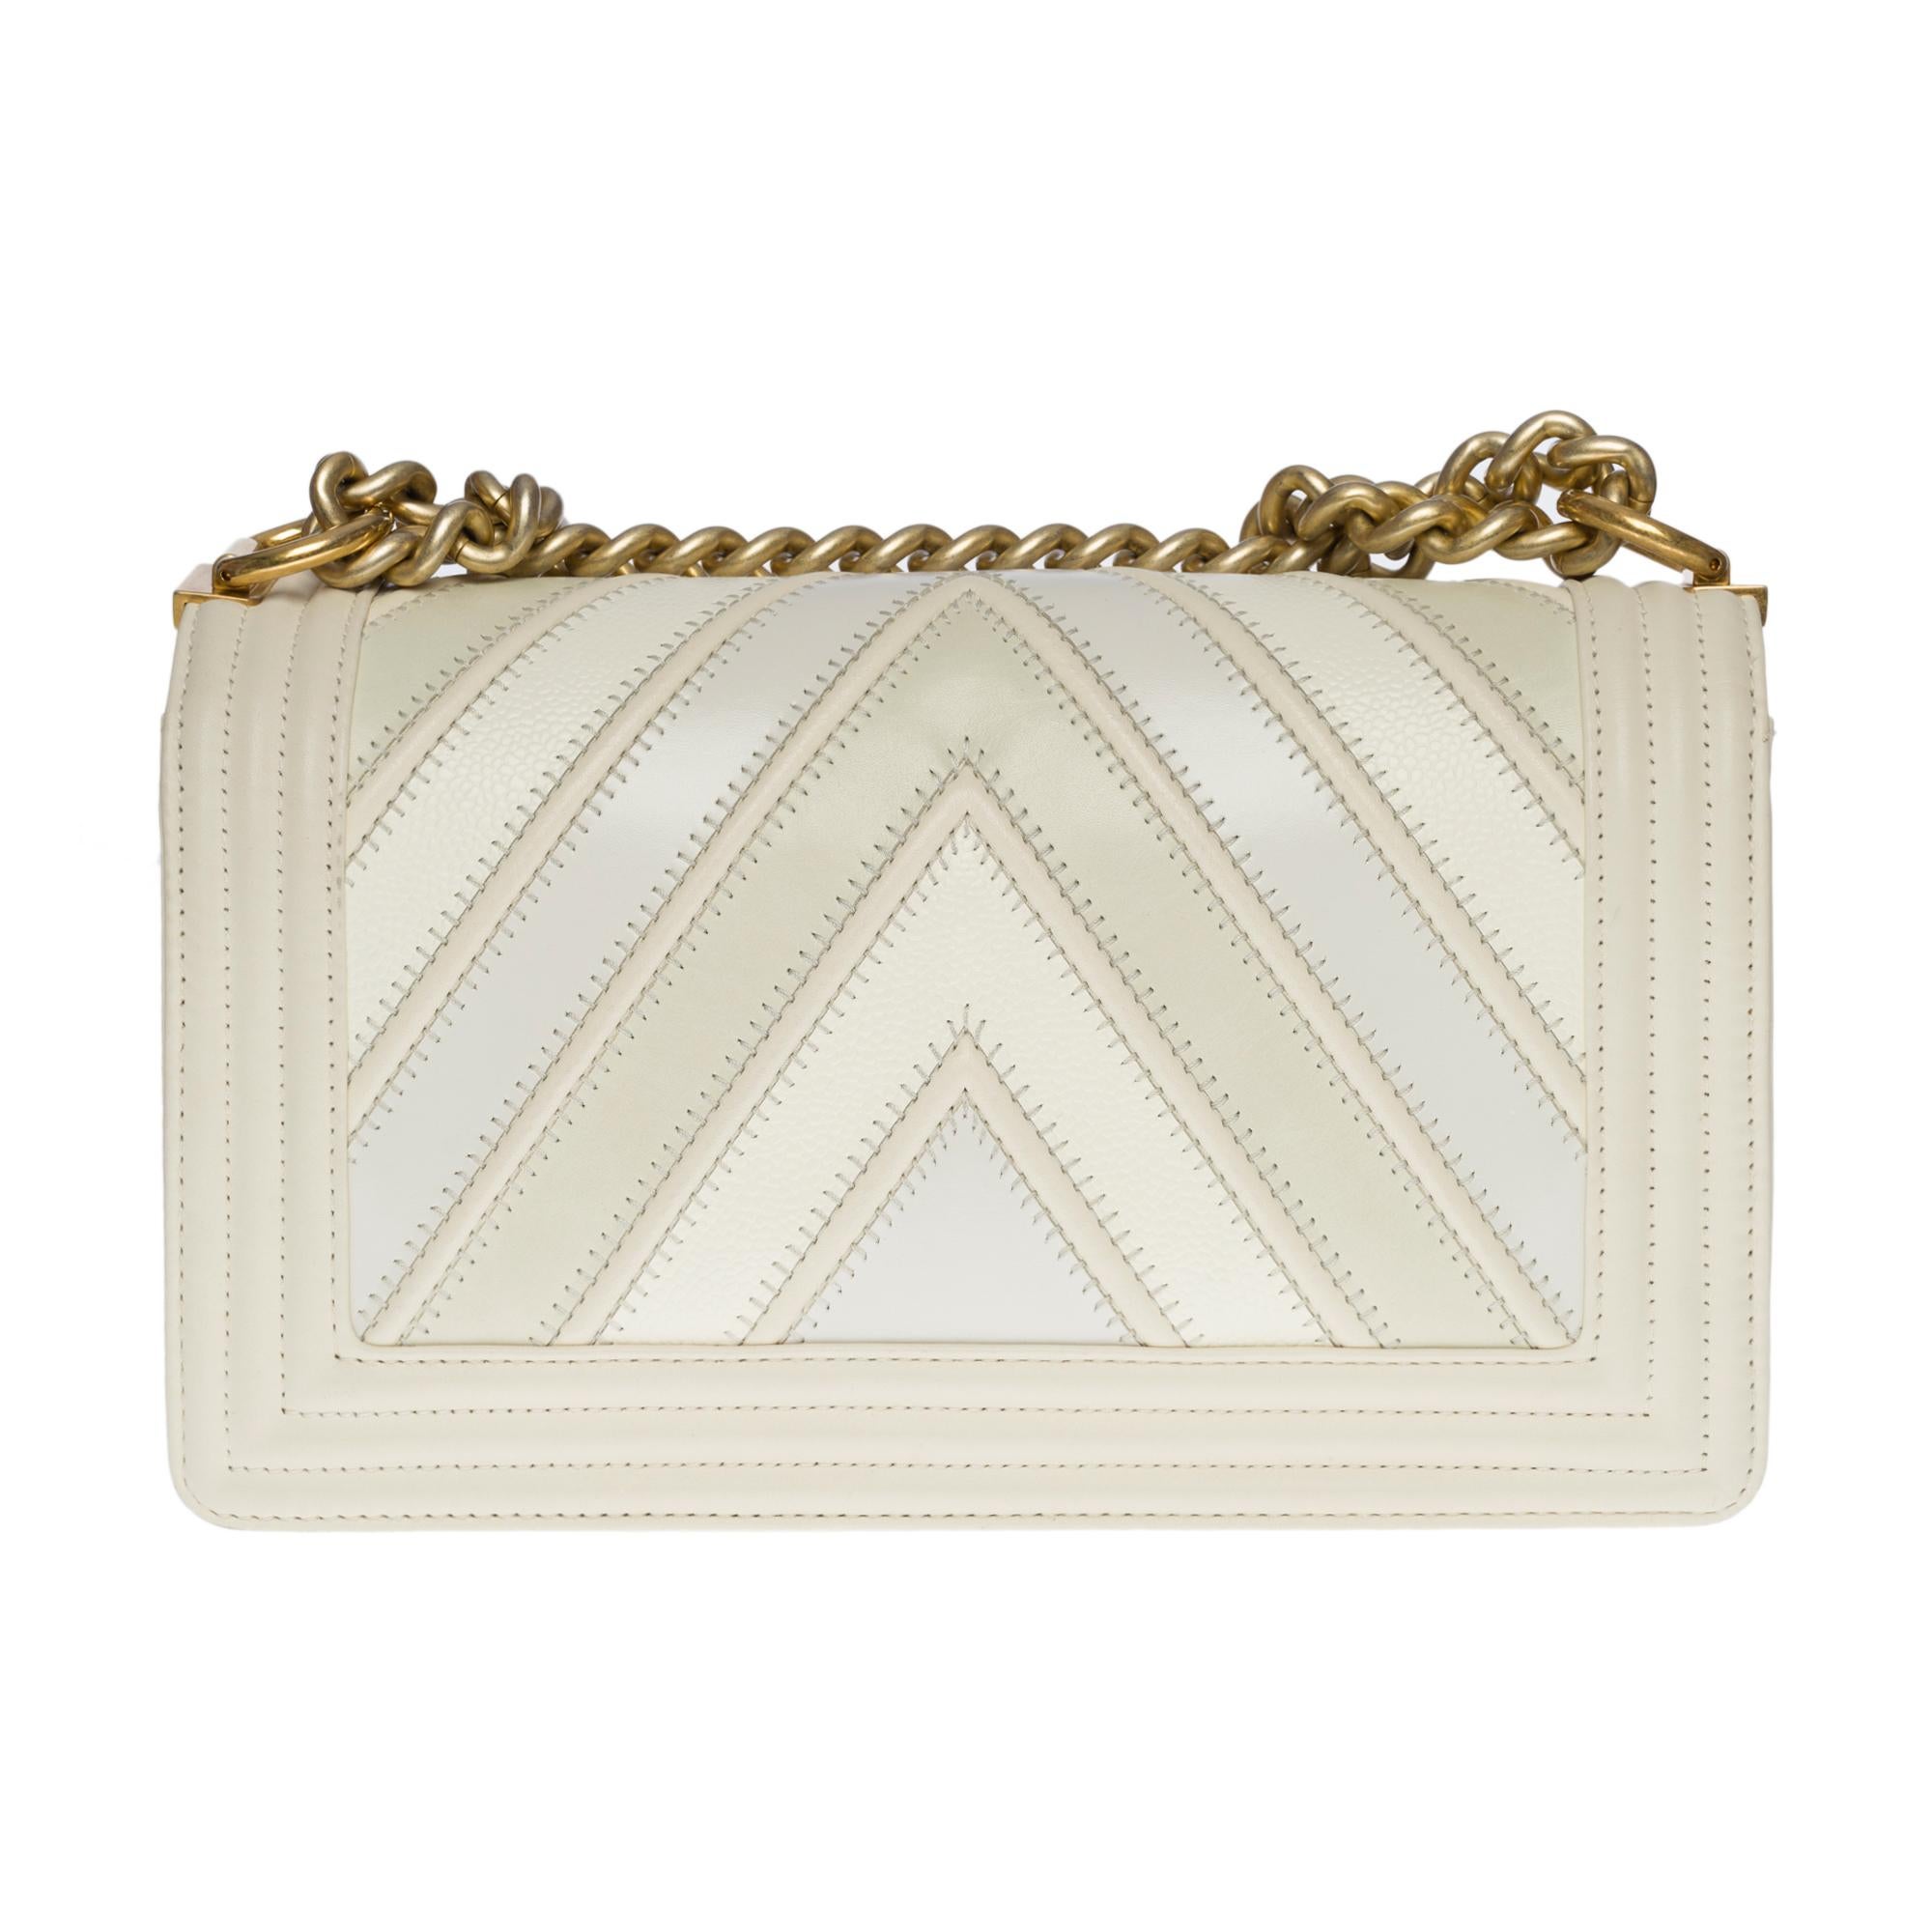 Gorgeous & rare Chanel Boy Old Medium 4 color herringbone shoulder bag in off-white lambskin leather, with white, pastel green and white grained herringbone leather stripes, gold-plated hardware, champagne metal and off-white leather chain handle